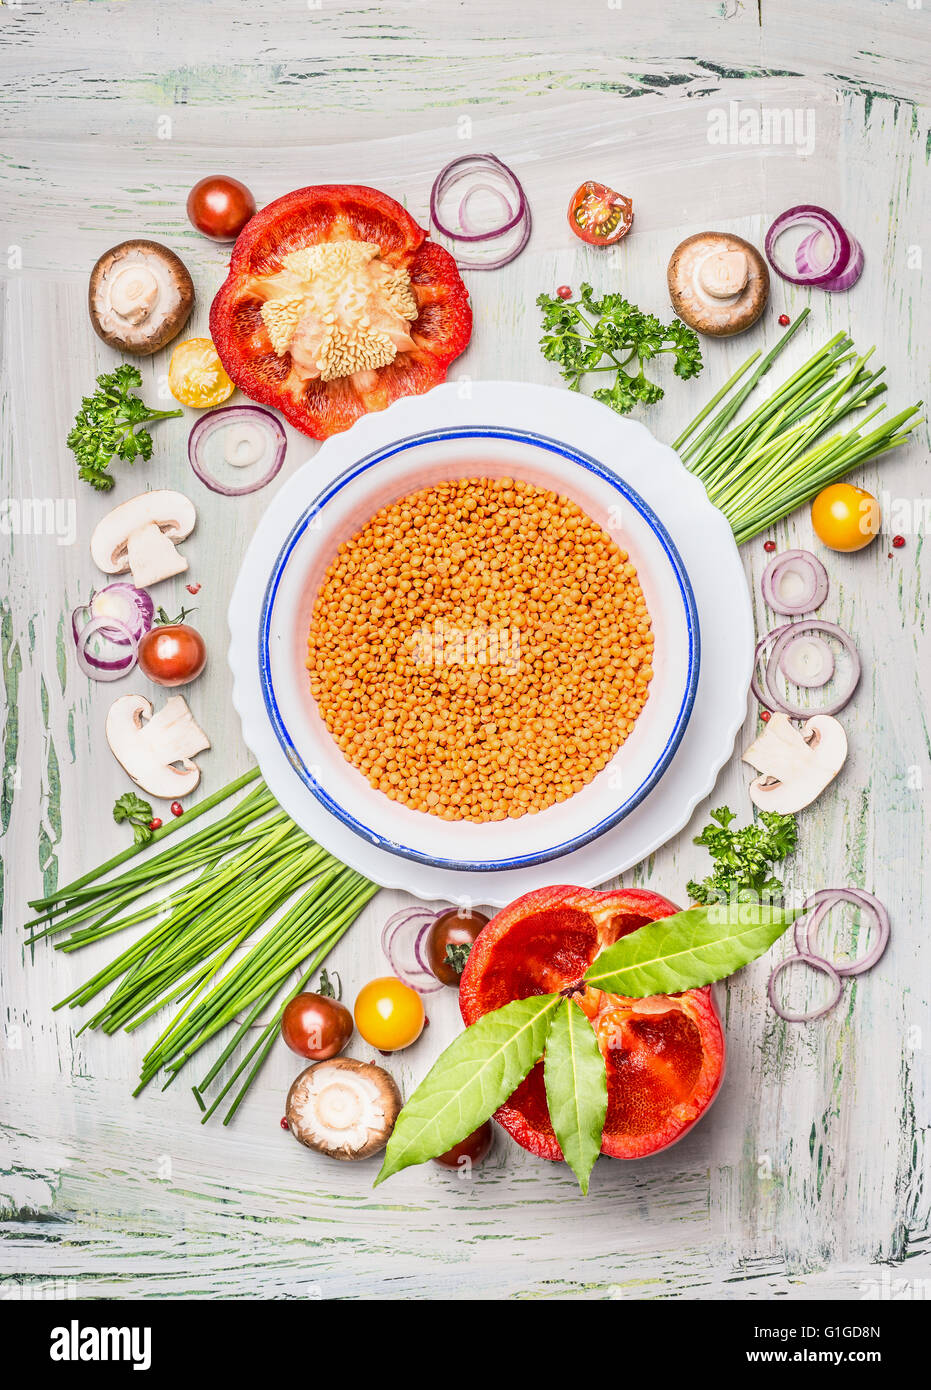 Red lentil in bowl and vegetables ingredients for healthy vegetarian cooking, top view composing. Stock Photo